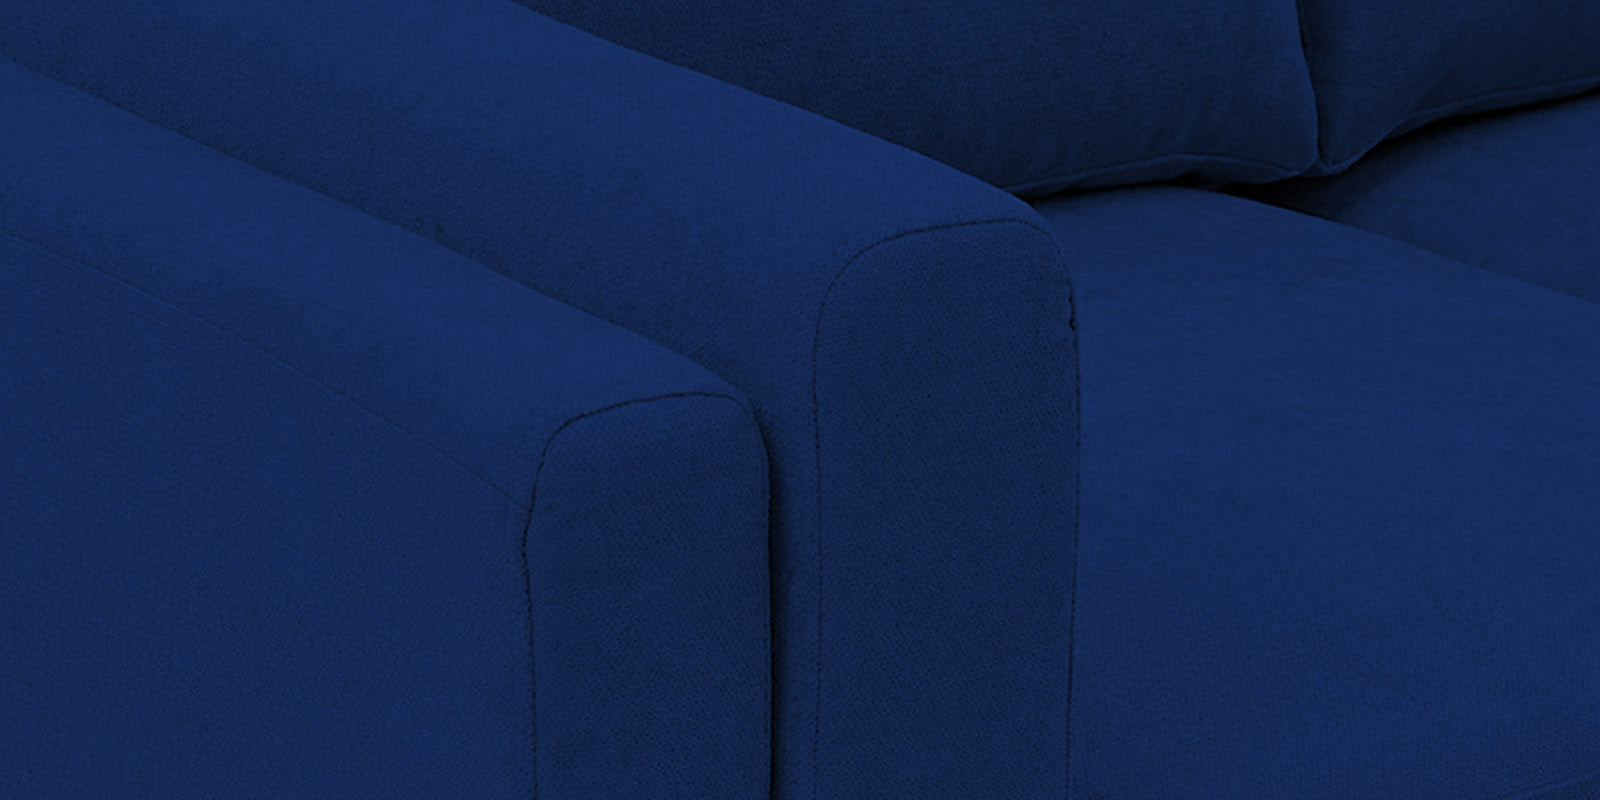 Creata Fabric RHS Sectional Sofa (3+Lounger) in Royal Blue Colour by Febonic